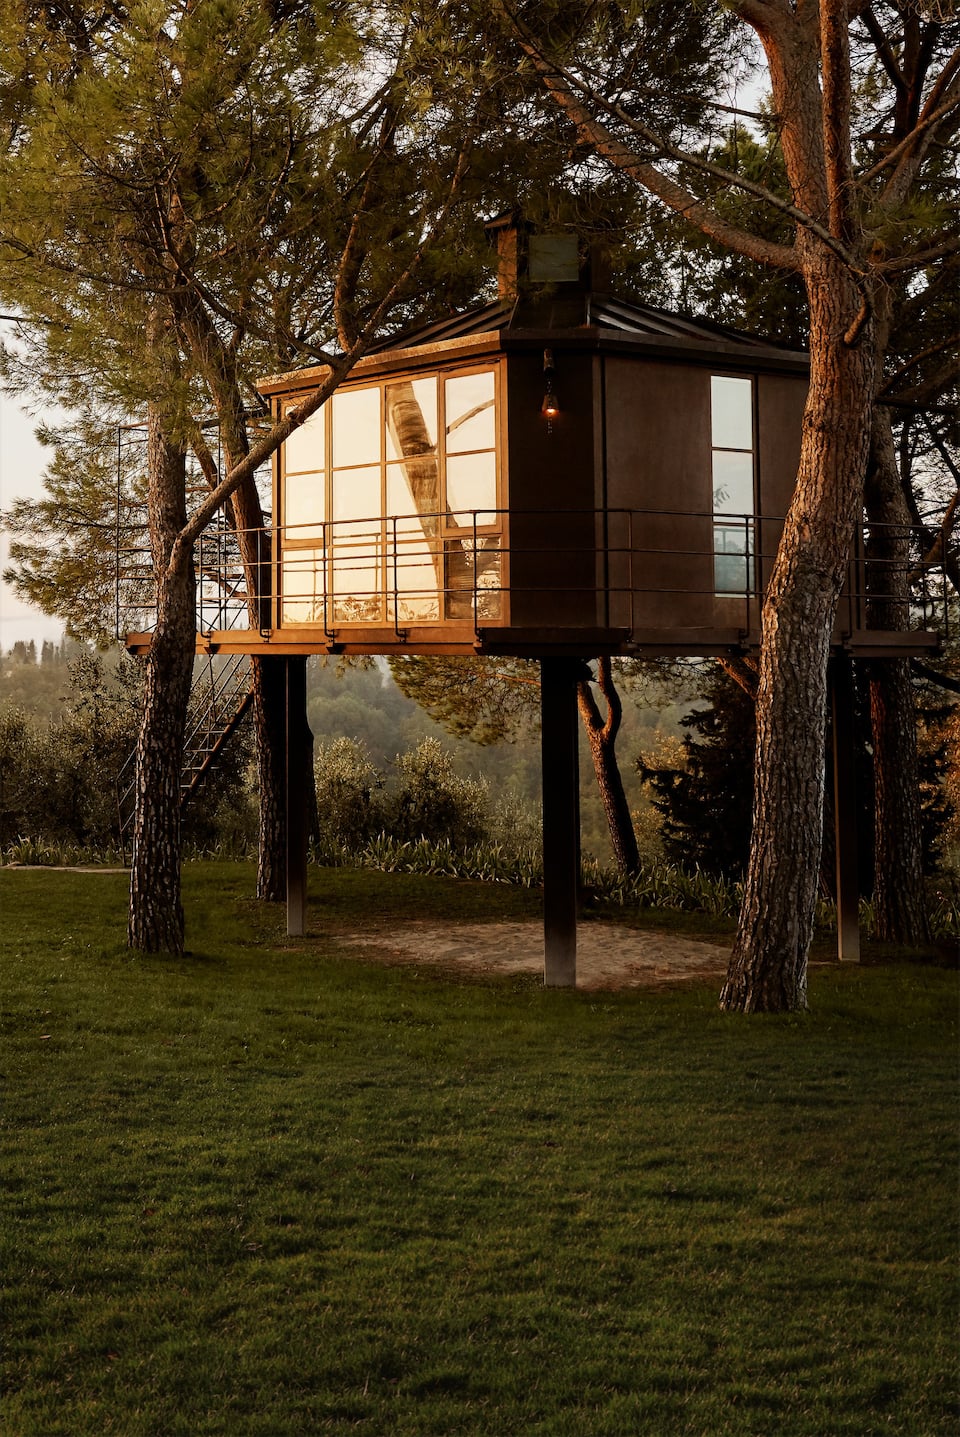 andrageren Compose klog Treehouse rentals | Airbnb